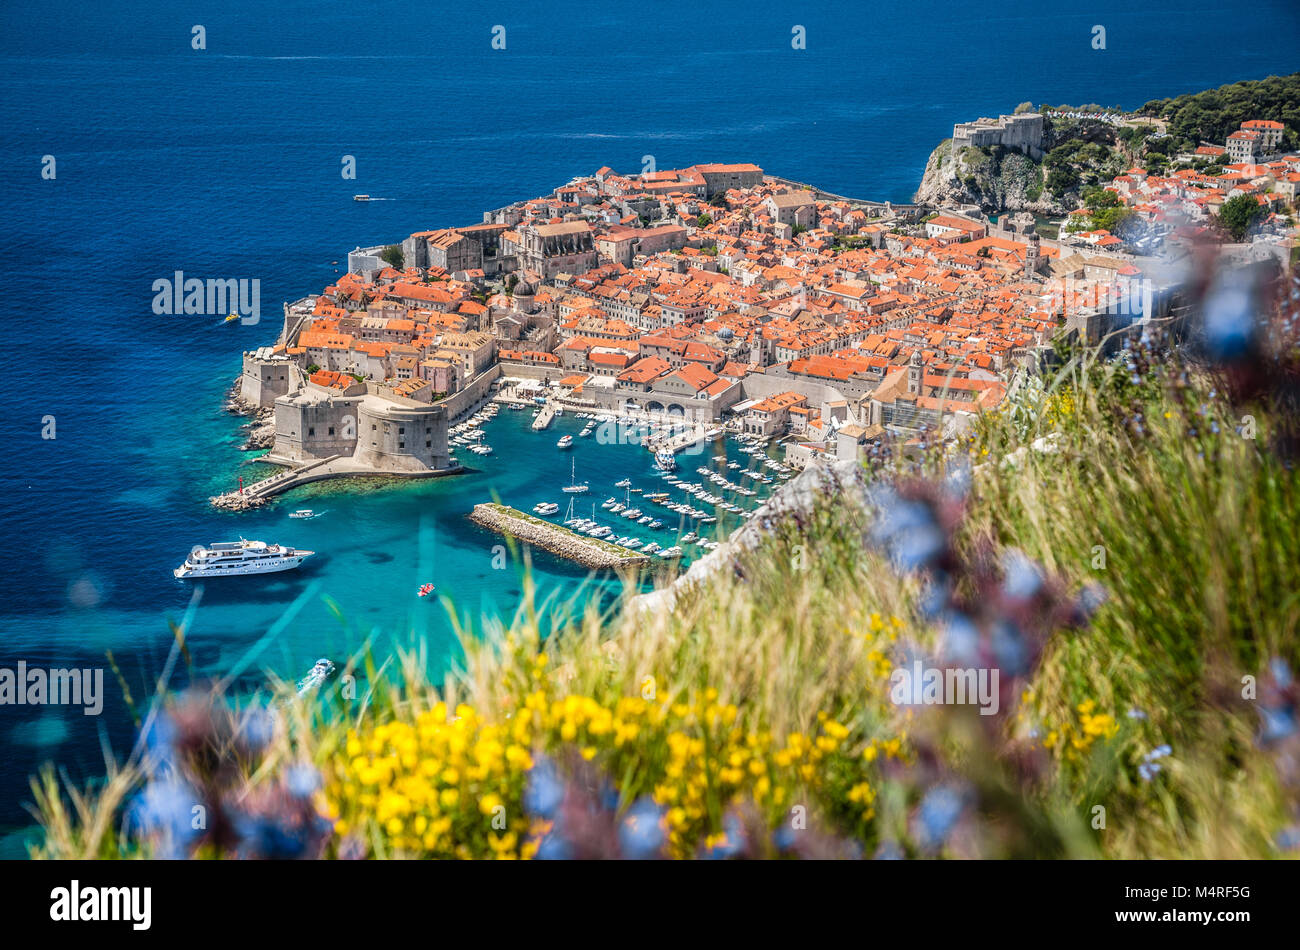 Aerial view of the historic town of Dubrovnik, one of the most famous tourist destinations in the Mediterranean Sea, from Srd mountain, Croatia Stock Photo